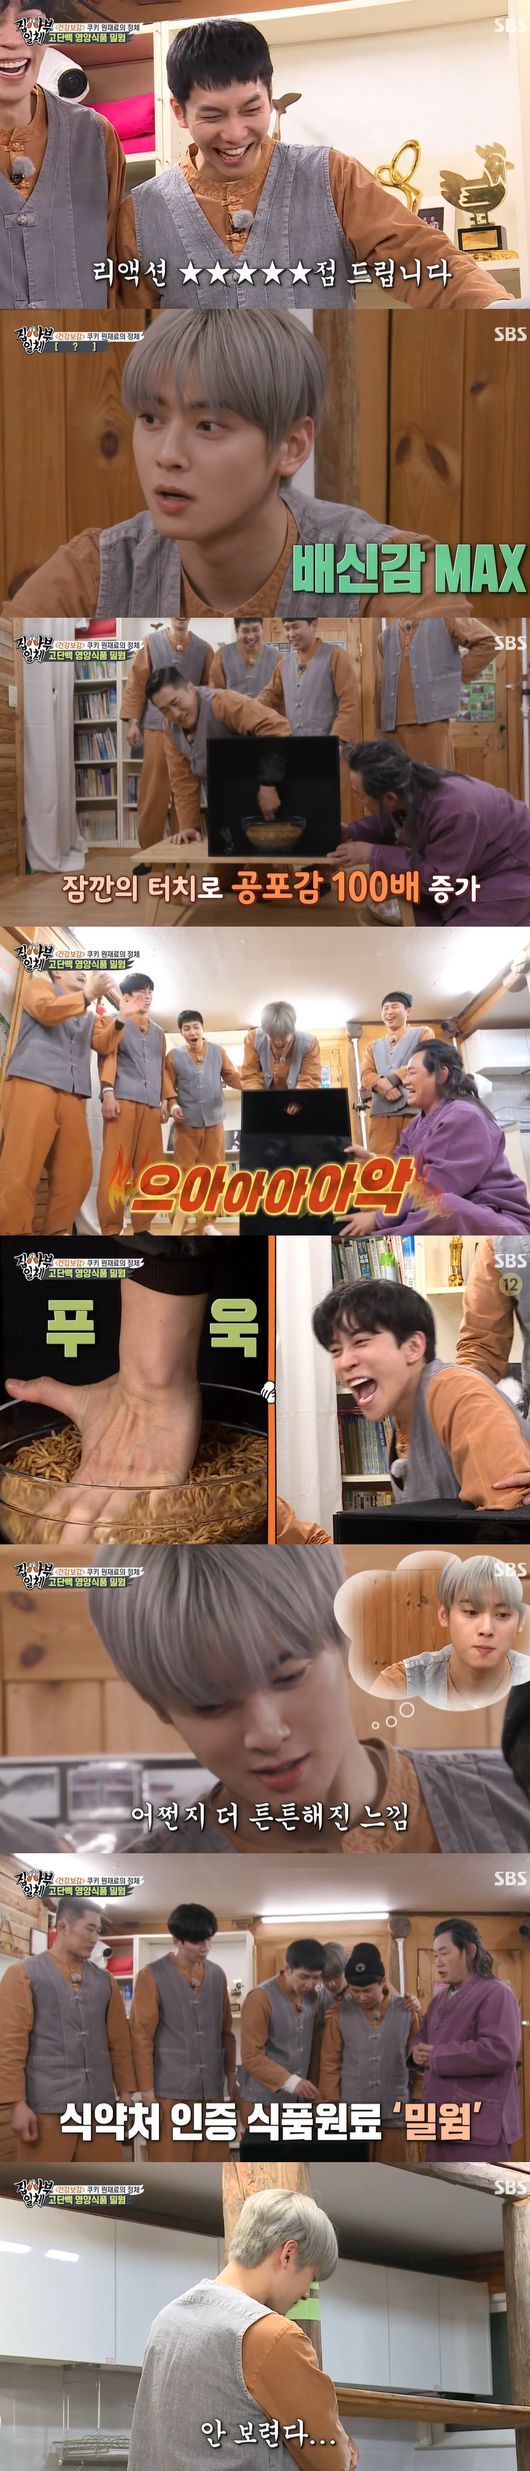 While Cha Eun-woo presented a high-protein food, Millworm (caterpillar) cookie mukbang, Sung Yu-ri laughed at Disclosure Lee Kyung-kyu.In particular, Lee Kyung-kyu added fun to Sung Yu-ri with a hard-to-see junior love.Lee Kyung-kyu appeared on SBS entertainment All The Butlers broadcast on the 11th.Lee Kyung-kyu gave the members an entertainment health care. First, the members decided to disclose the identity of the cookie raw material that they ate without knowing anything.Lee Kyung-kyu put his hand in the black box and told him to hit it, and he encouraged Kim Dong-Hyun to start with; he was a larvae, a wheatworm, who revealed his high protein nutrition, identity.Next was Lee Seung-gi, the Top Model; Lee Seung-gi, confused, saying he was a single-species mammal with a snout and grope.Cha Eun-woo was the top model; Cha Eun-woo was confused by the courageous, unthinkable tactile reaction that exploded and I met twoYang Se-hyeong was the Top Model, Kim Dong-Hyun, who saw it next to him, accidentally saw the identity and was surprised and turned over.The last Shin Sung-rok reached out courageously, but also fell back with the sound.After that, the members who learned about the identity of the wheat worm were surprised and accepted that they were the food raw materials certified by the Food and Drug Administration and were attracting attention as future food.Cha Eun-woo laughed at the betrayal of eating seven and a half.Lee Kyung-kyu said, I prepared a training to get high proteins. Lee Seung-gi experienced a secret room from Lee Seung-gi, saying, It is very good, but I will lie down for a while.Lee Seung-gi, who was snowy, said, It seems to be right to broadcast with this mental power.On the other hand, Sung Yu-ri, who was connected to the phone on the same day, said, It is a style that runs away when you get close to Lee Kyung-kyu, but it is hard to produce a bad image.Sung Yu-ri said, I used to have a healing camp with Han Hye-jin and only two numbers that I knew as a female entertainer. After that, I did not know who Sung Yu-ri was when I was entertaining with Kim Min-jung.When Sung Yu-ri tried to hang up, he said, Please tell me you love me. Lee Kyung-kyu said, I love you. He conveyed his love for his juniors and gave a warm look to Lee Kyung-kyu.All The Butlers broadcast screen capture